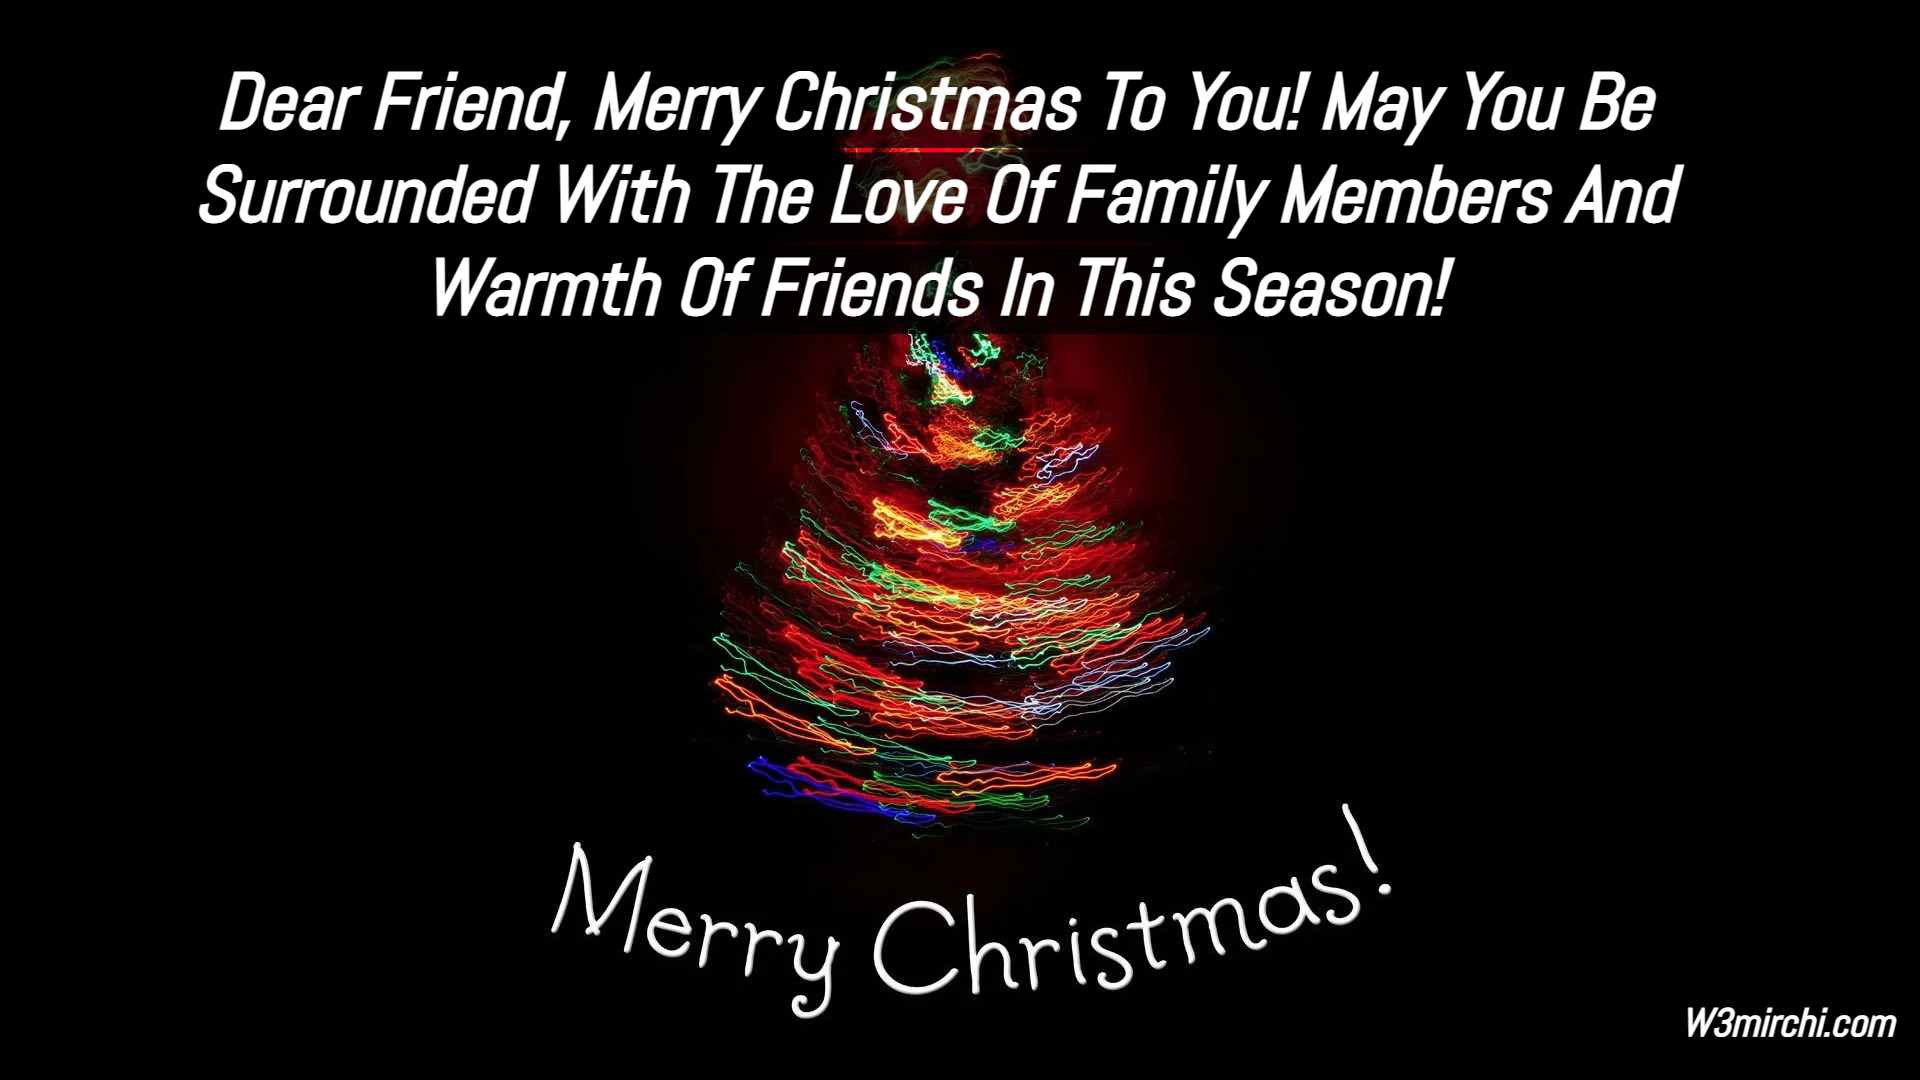 Dear Friend, Merry Christmas To You! May